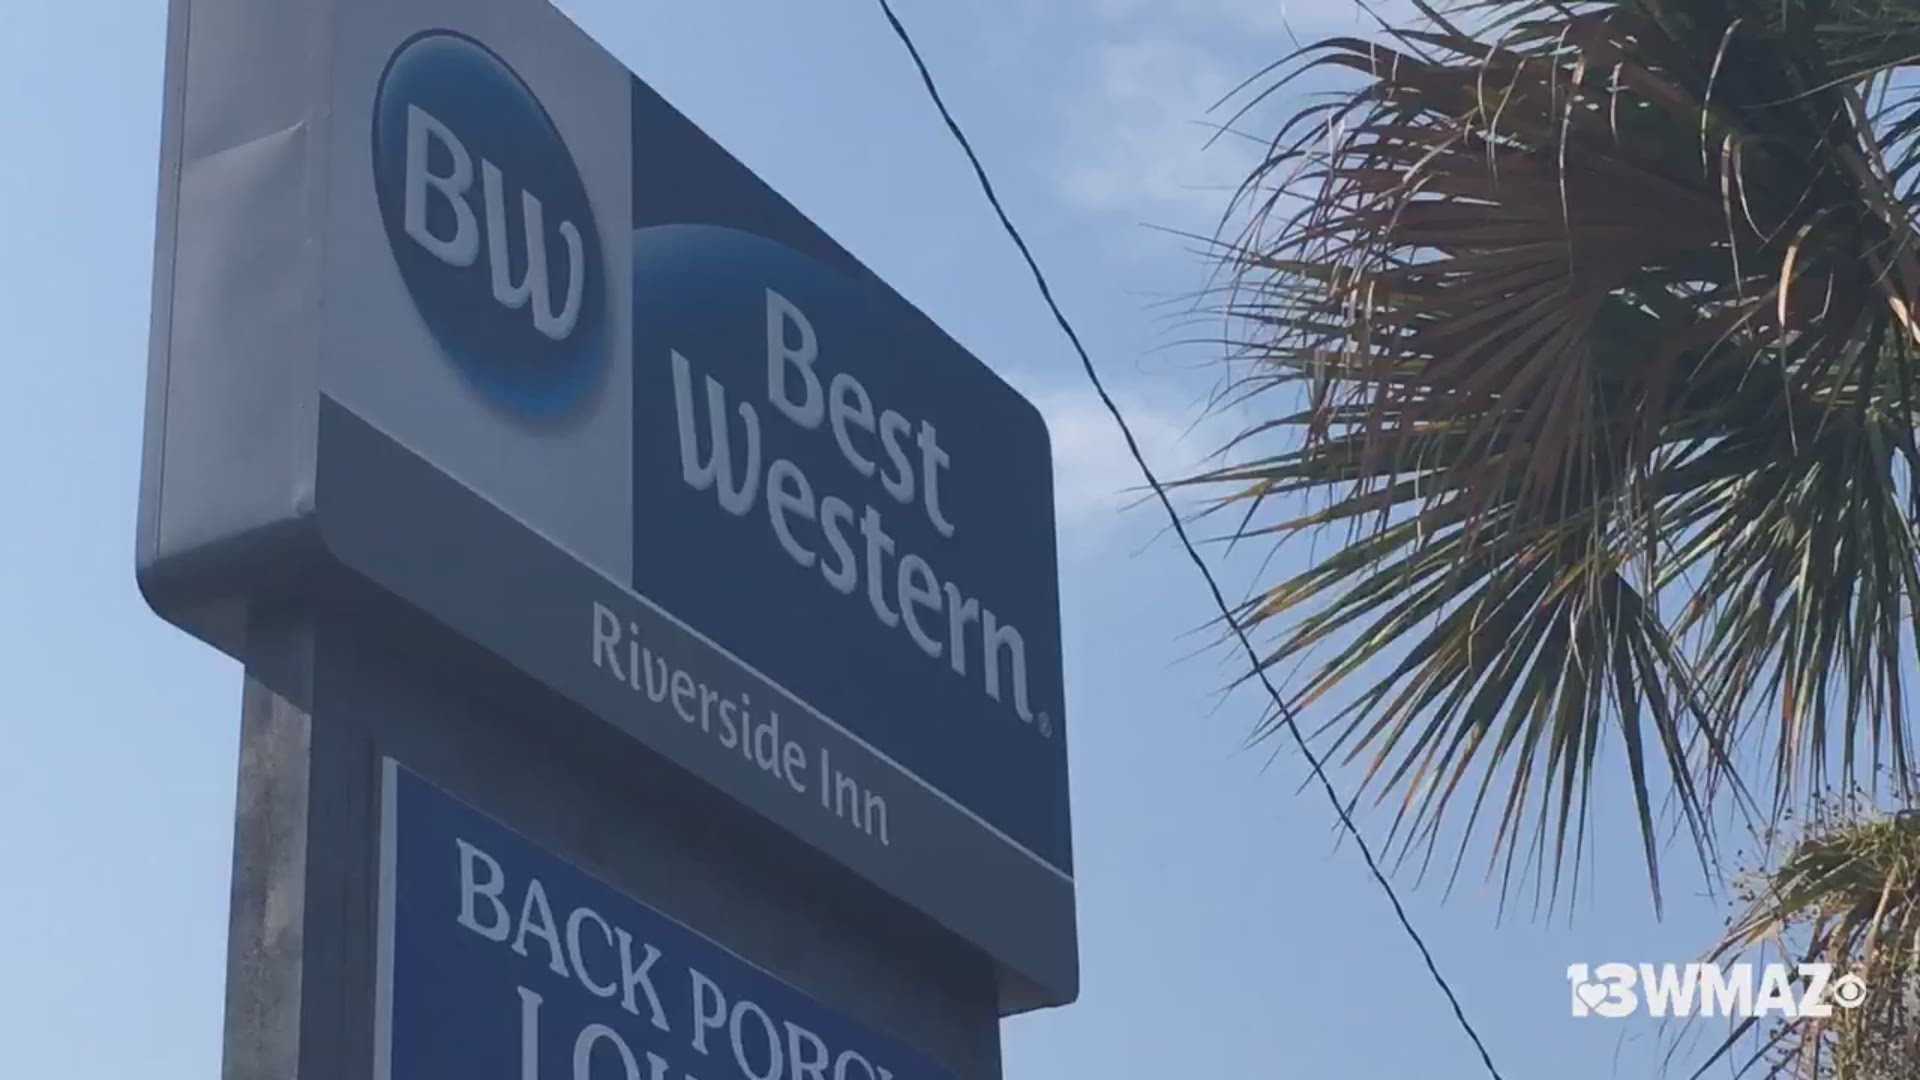 The Bibb County Sheriff's Office says it happened early Monday morning at the hotel location on Riverside Drive. They're still looking for the suspect.